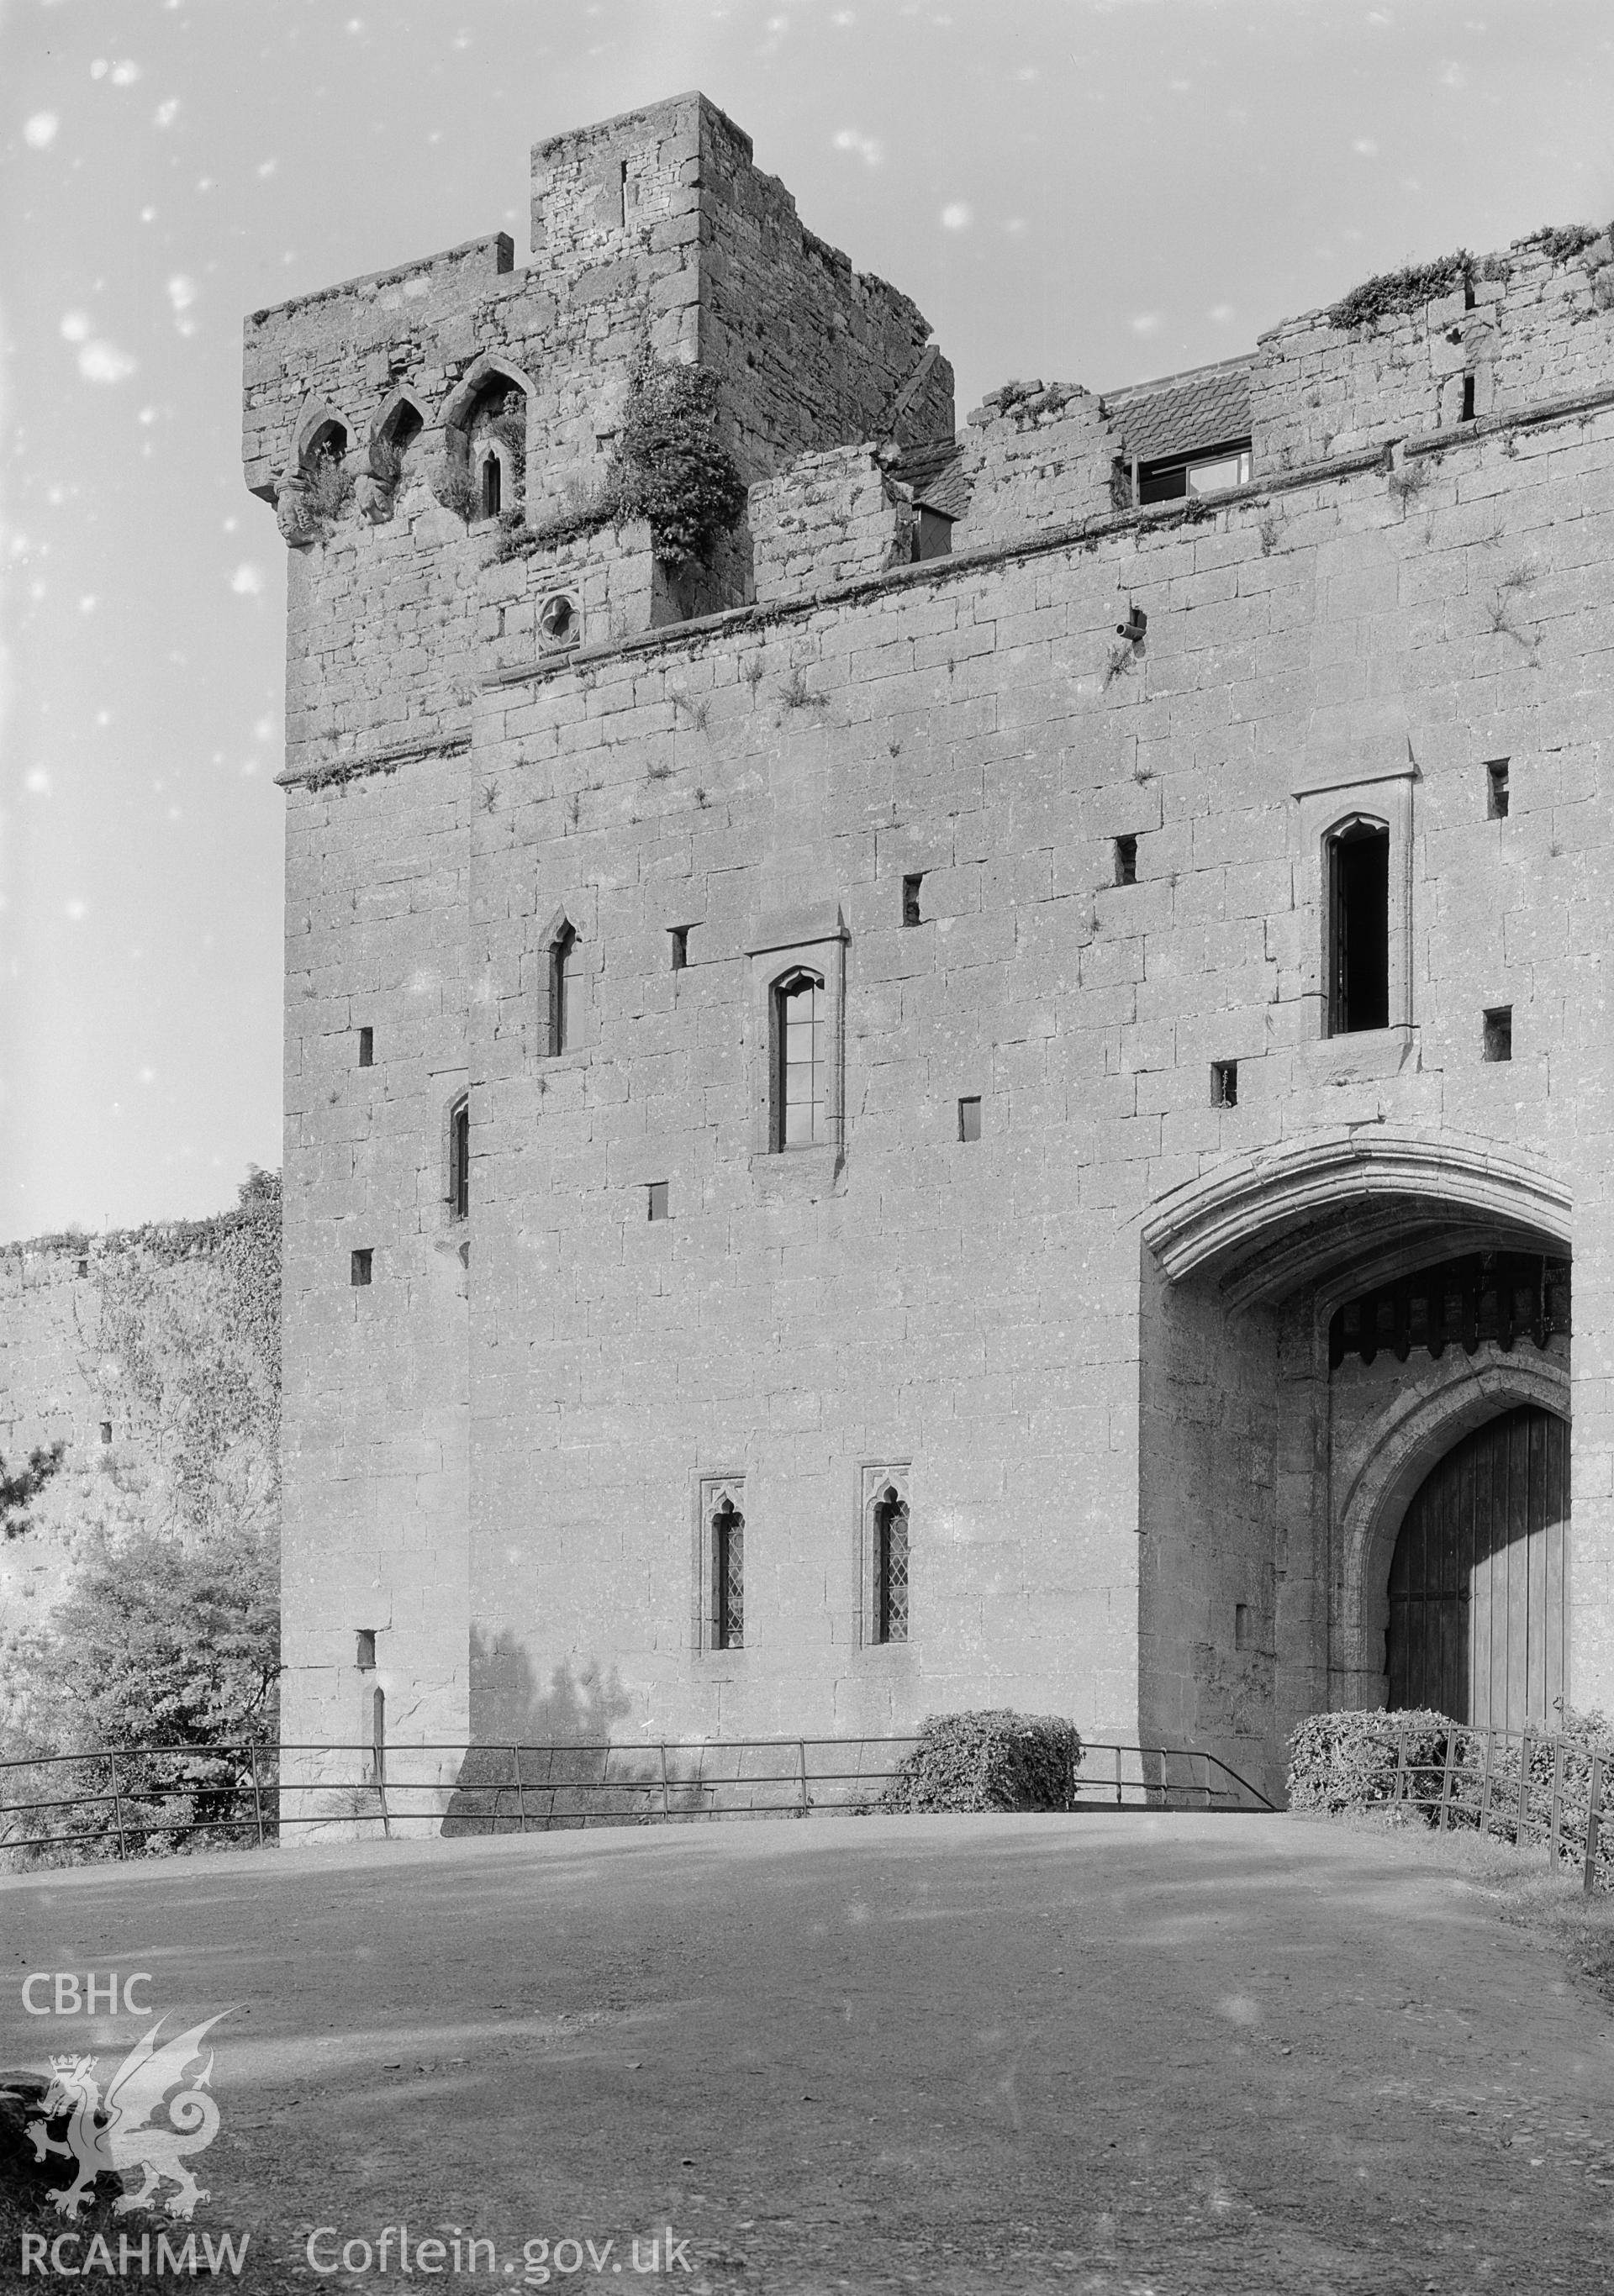 View of the gateway of Caldicot Castle.